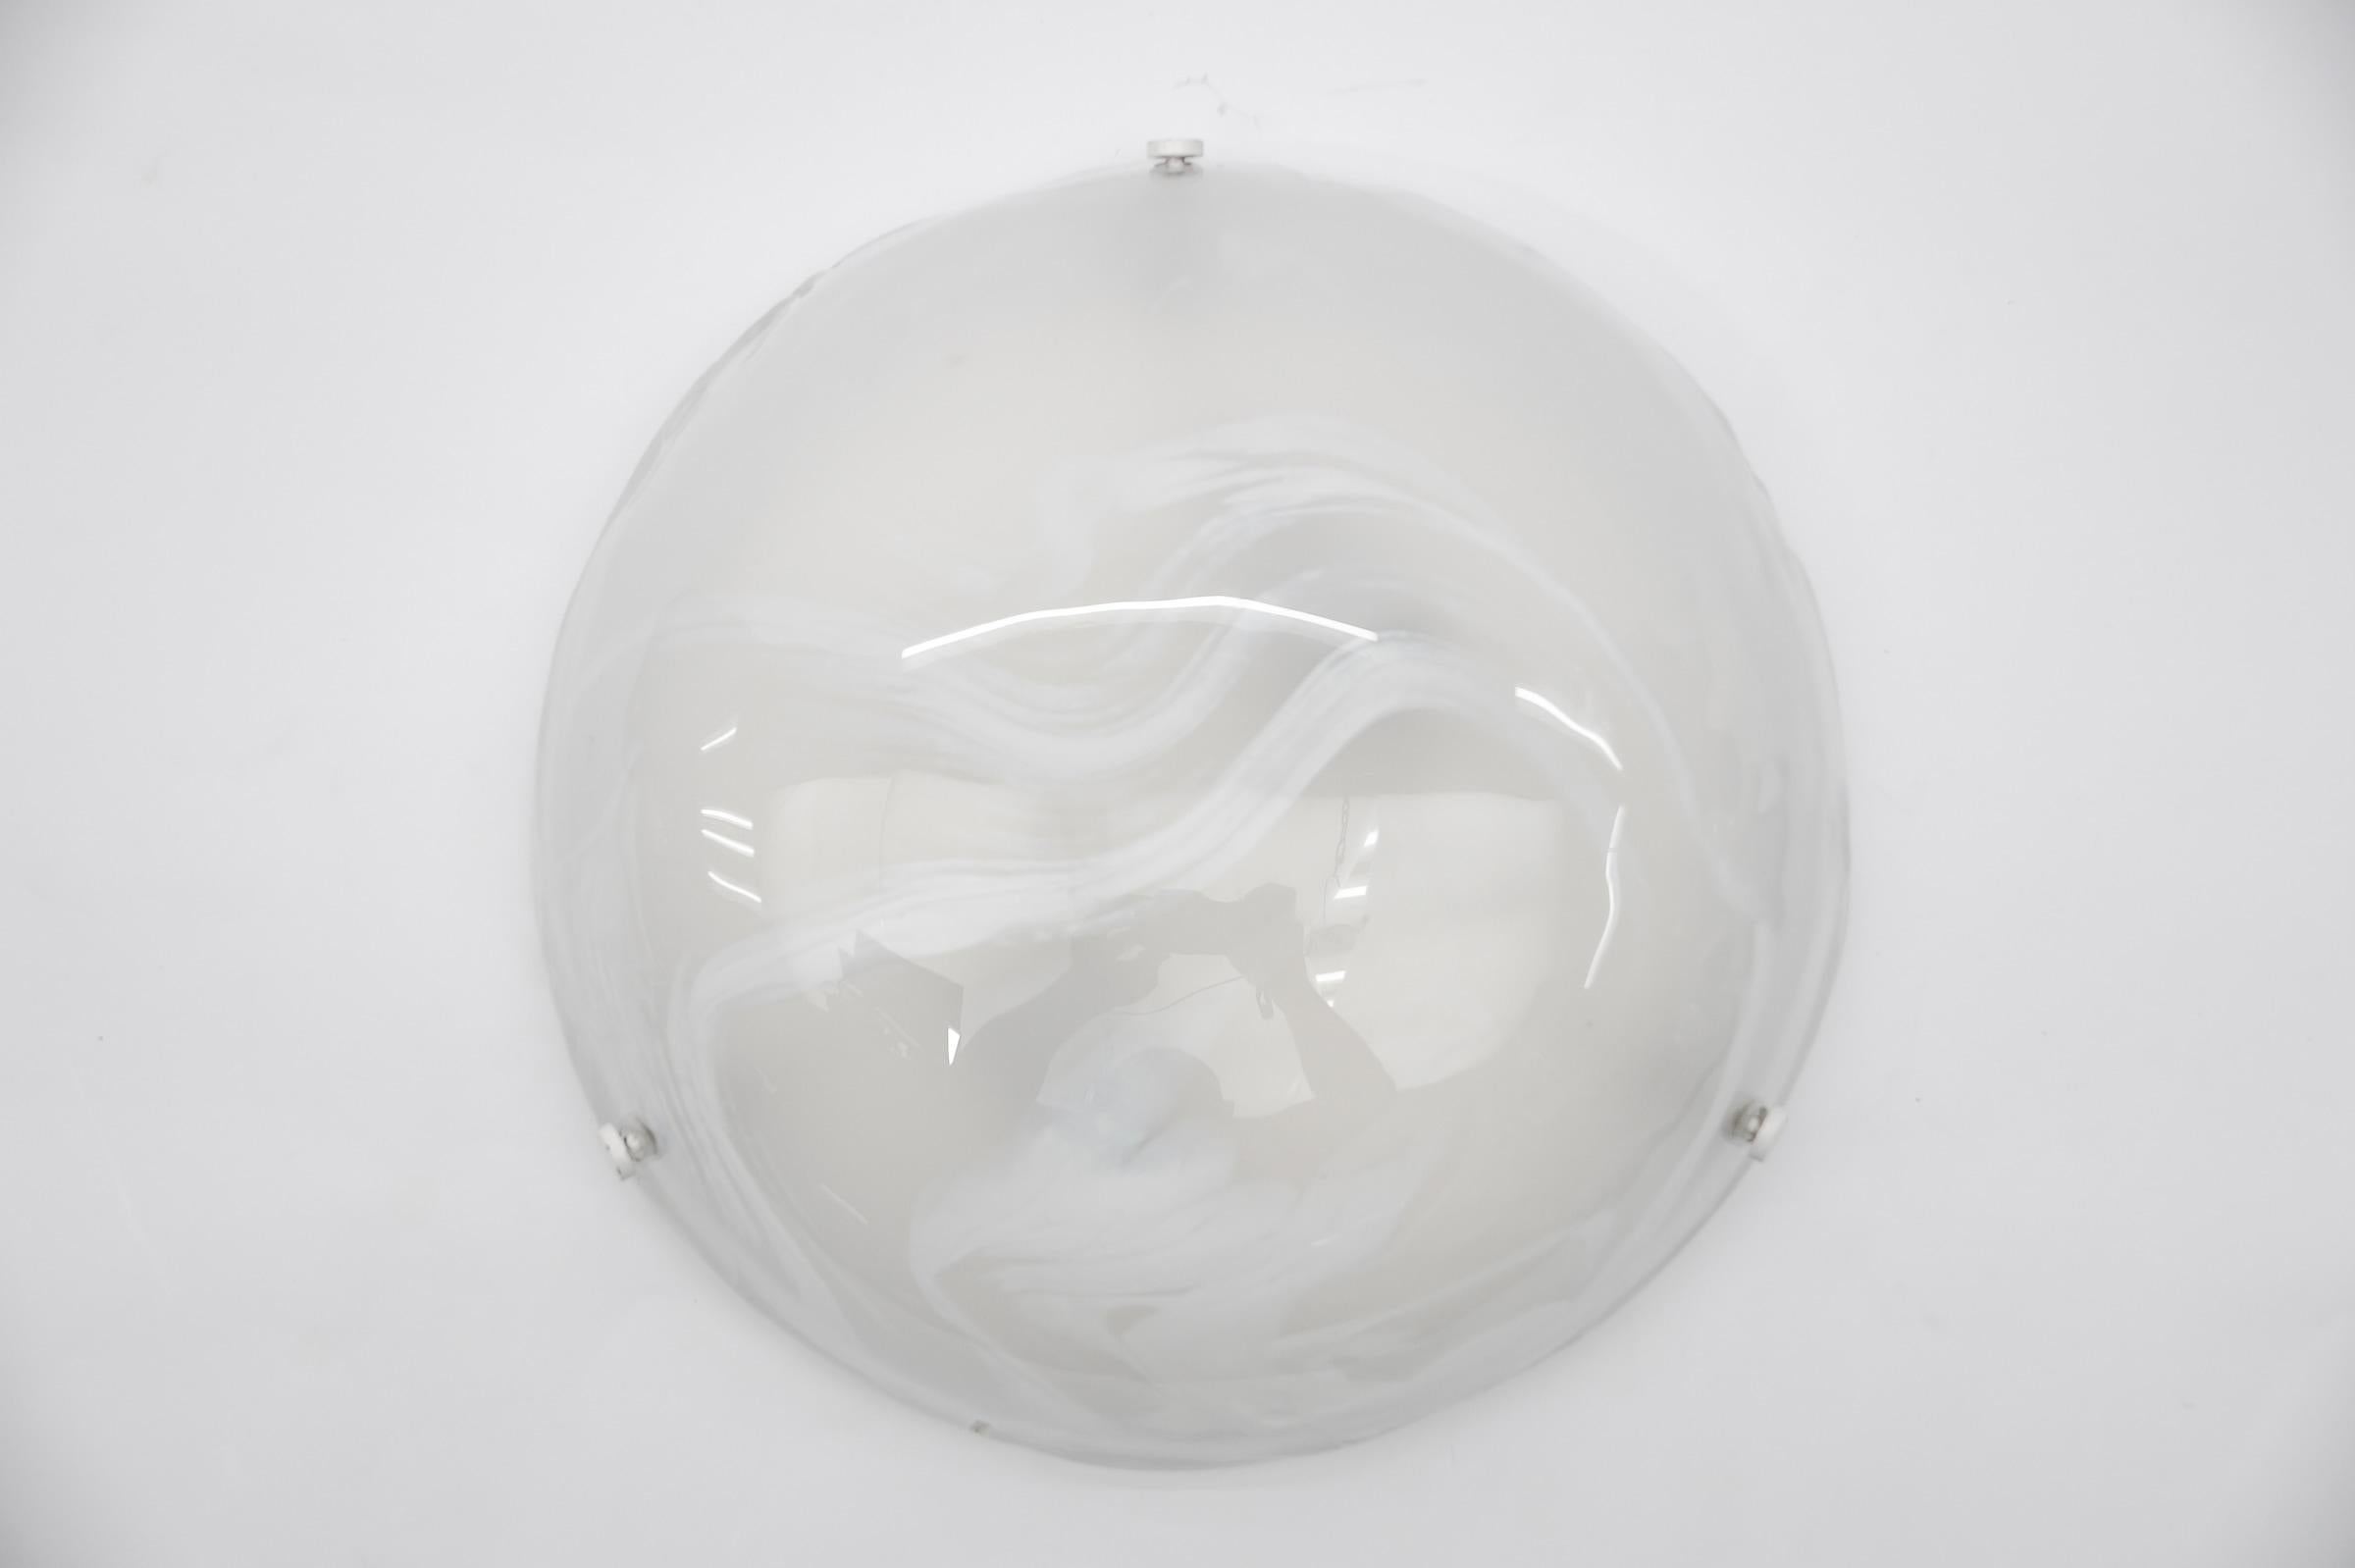 White Murano Glass Flush Mount Light by Hillebrand, Germany 1960s,

Dimensions
Height: 4.33 in. (11 cm)
Diameter: 13.77 in. (35 cm)

The fixture need 2 x E27 standard bulb with 60W max.

Light bulbs are not included.
It is possible to install this